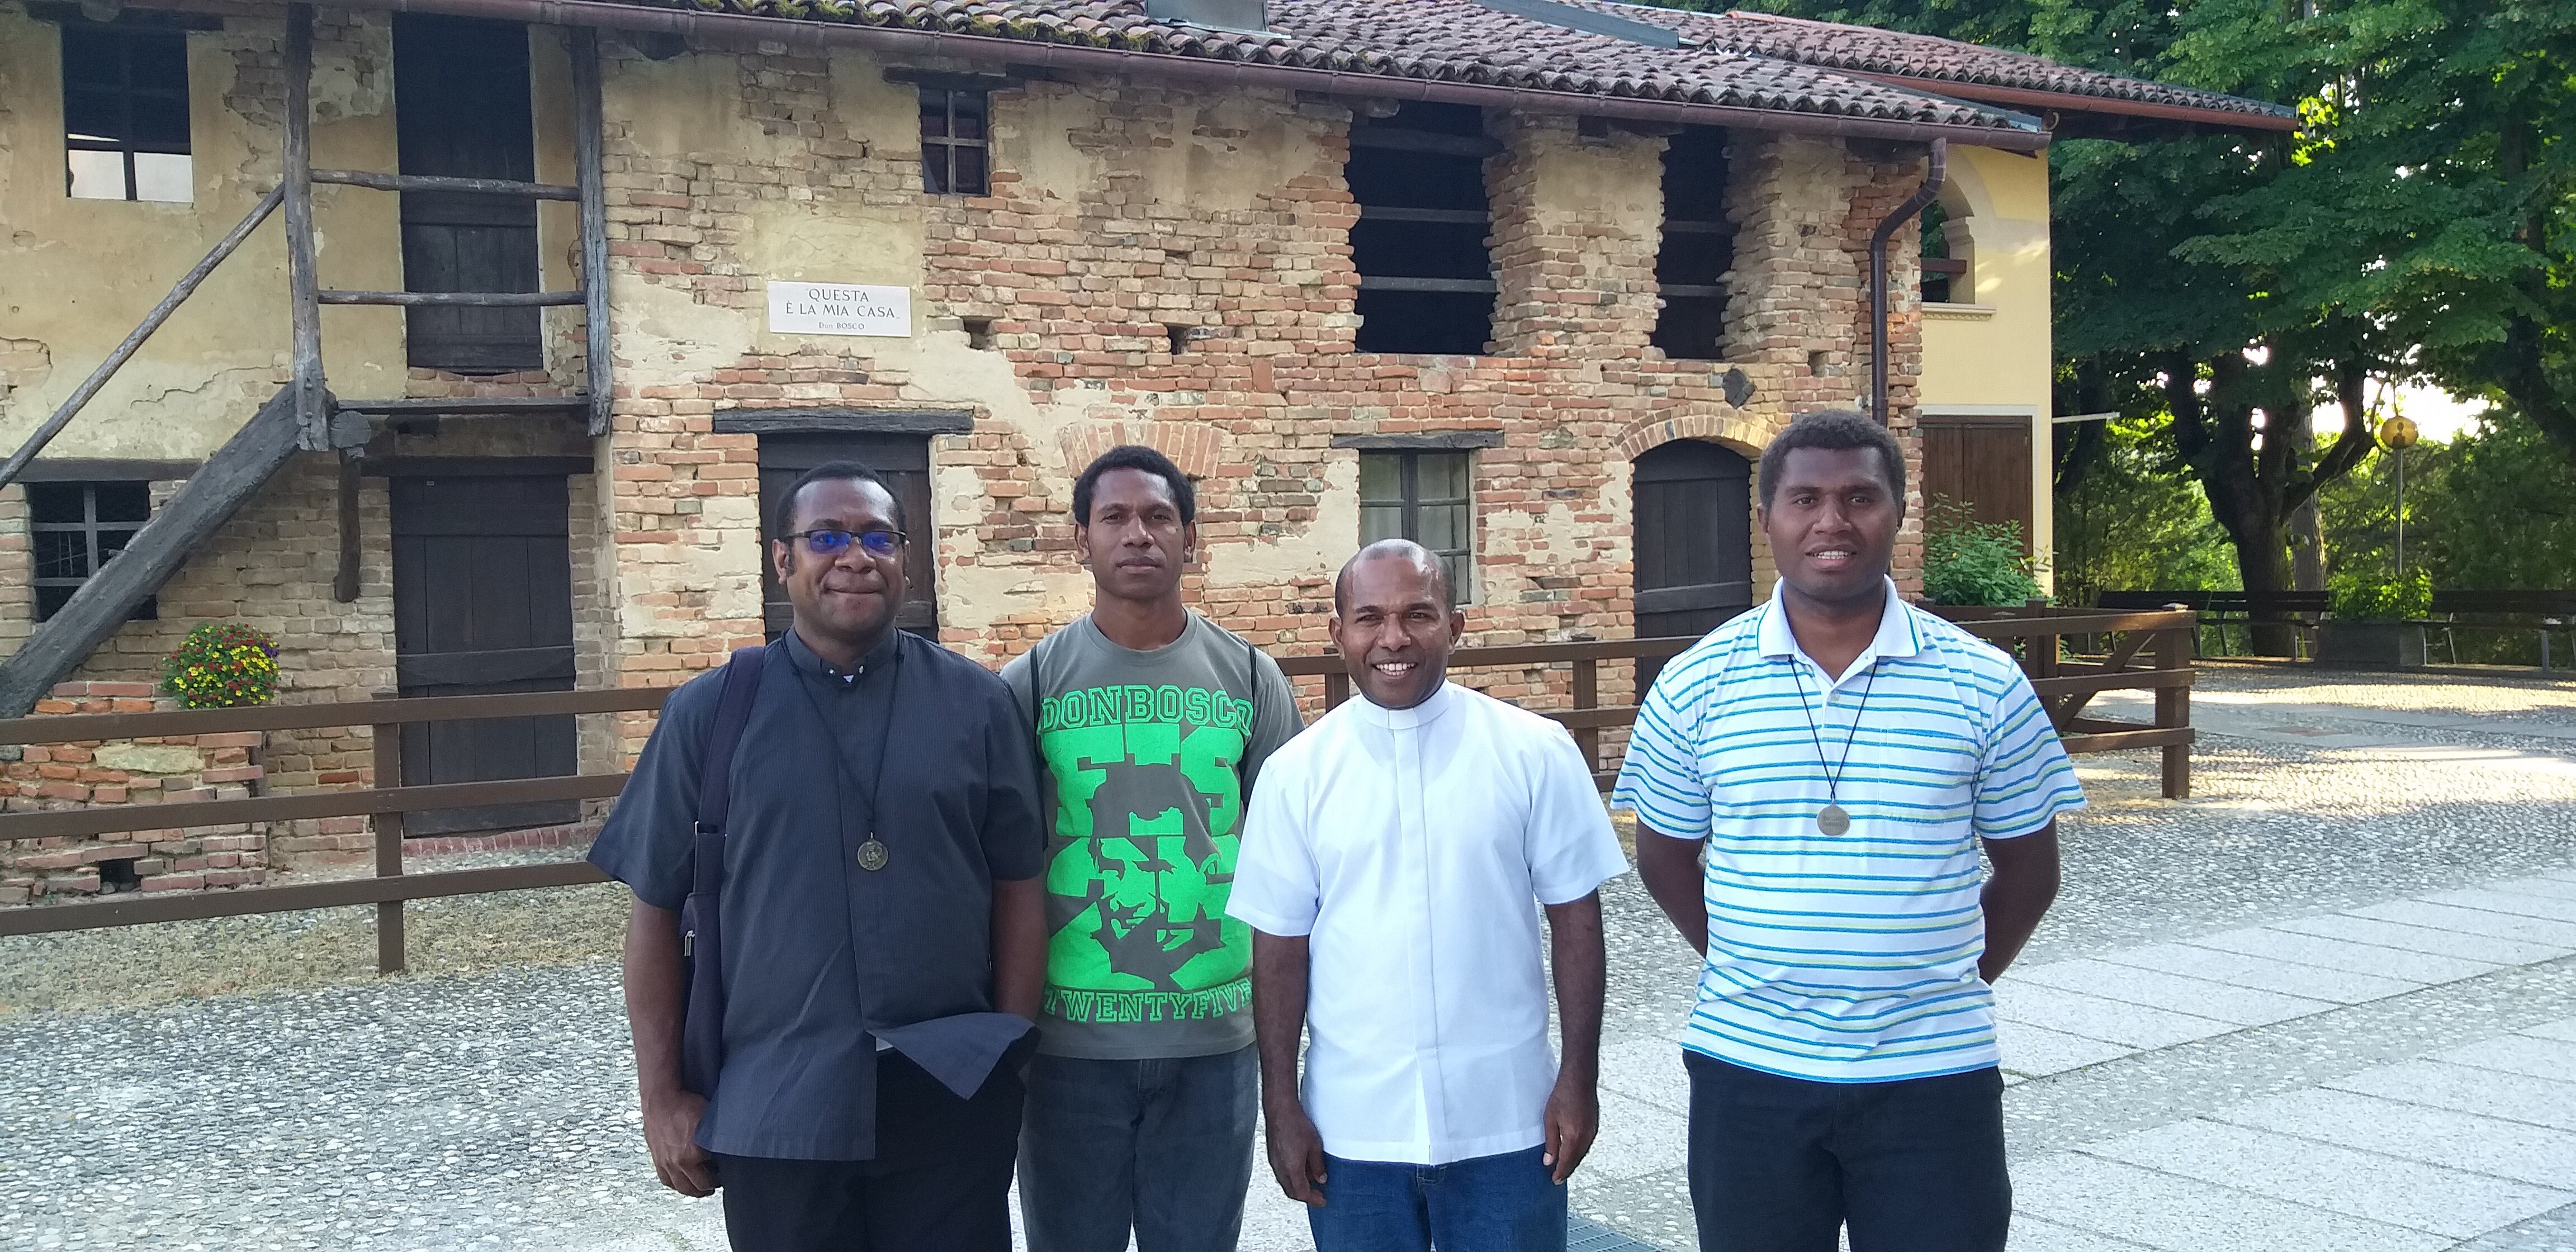 PGS pilgrimage-retreat-seminar in Salesian Holy places